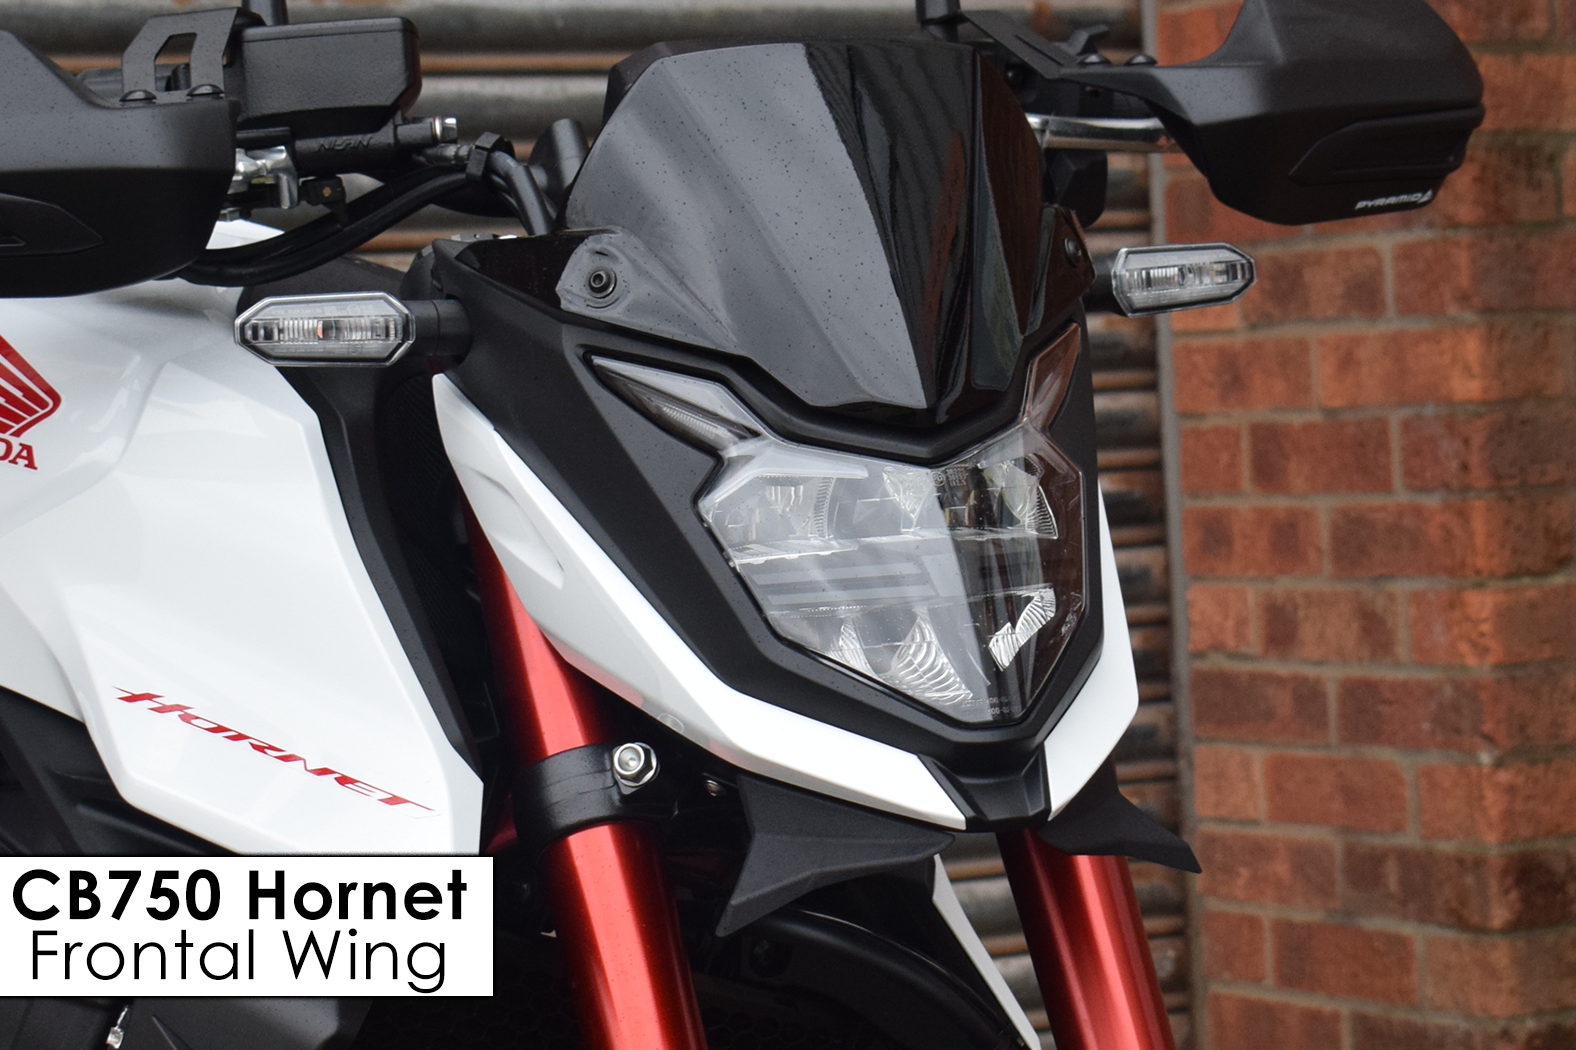 Frontal Wing Accessory For The Honda CB750 Hornet!